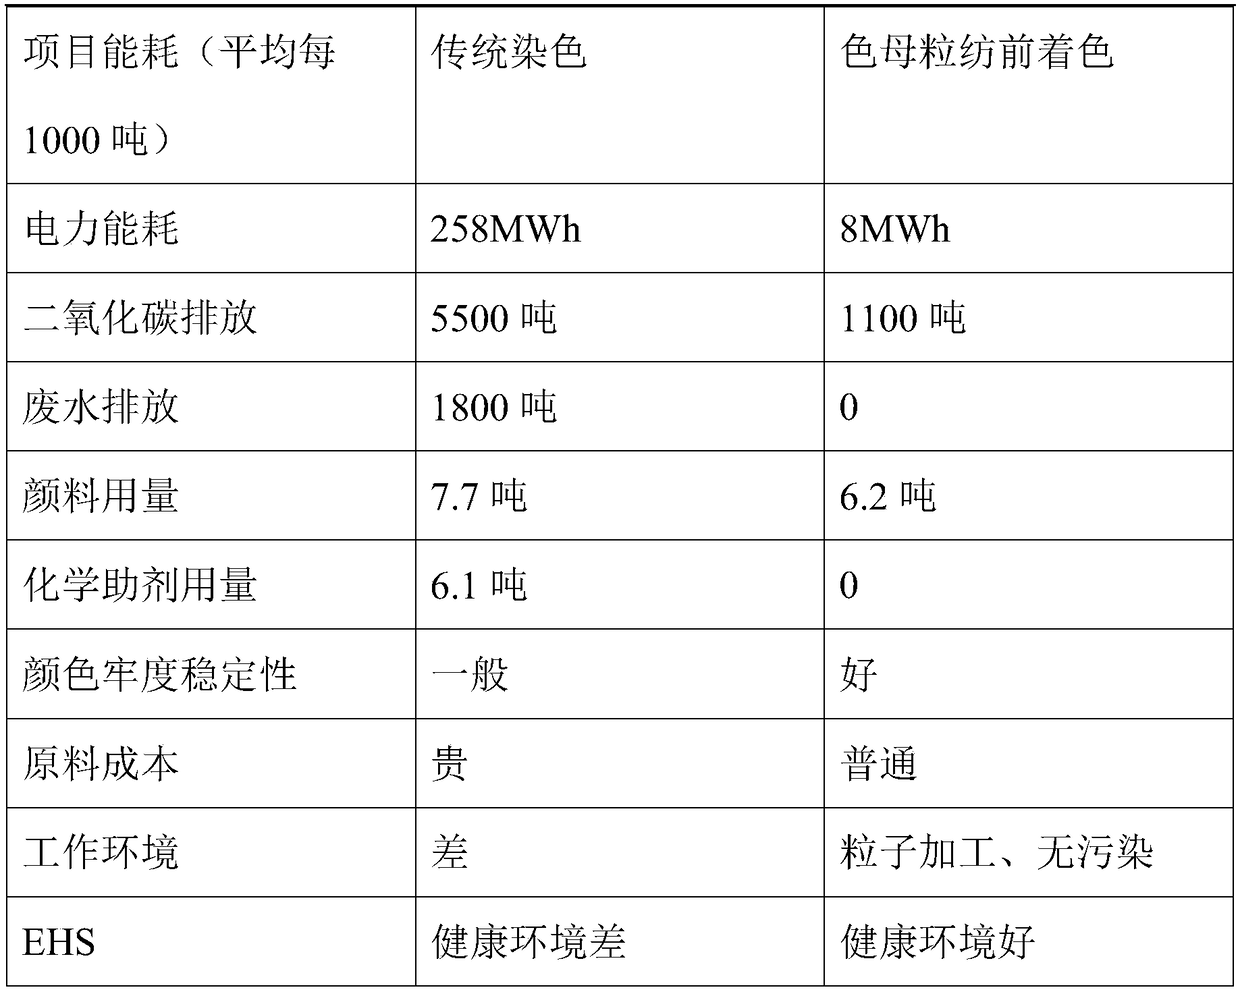 Tinting master batch capable of improving polyester fiber brightness and tinting strength